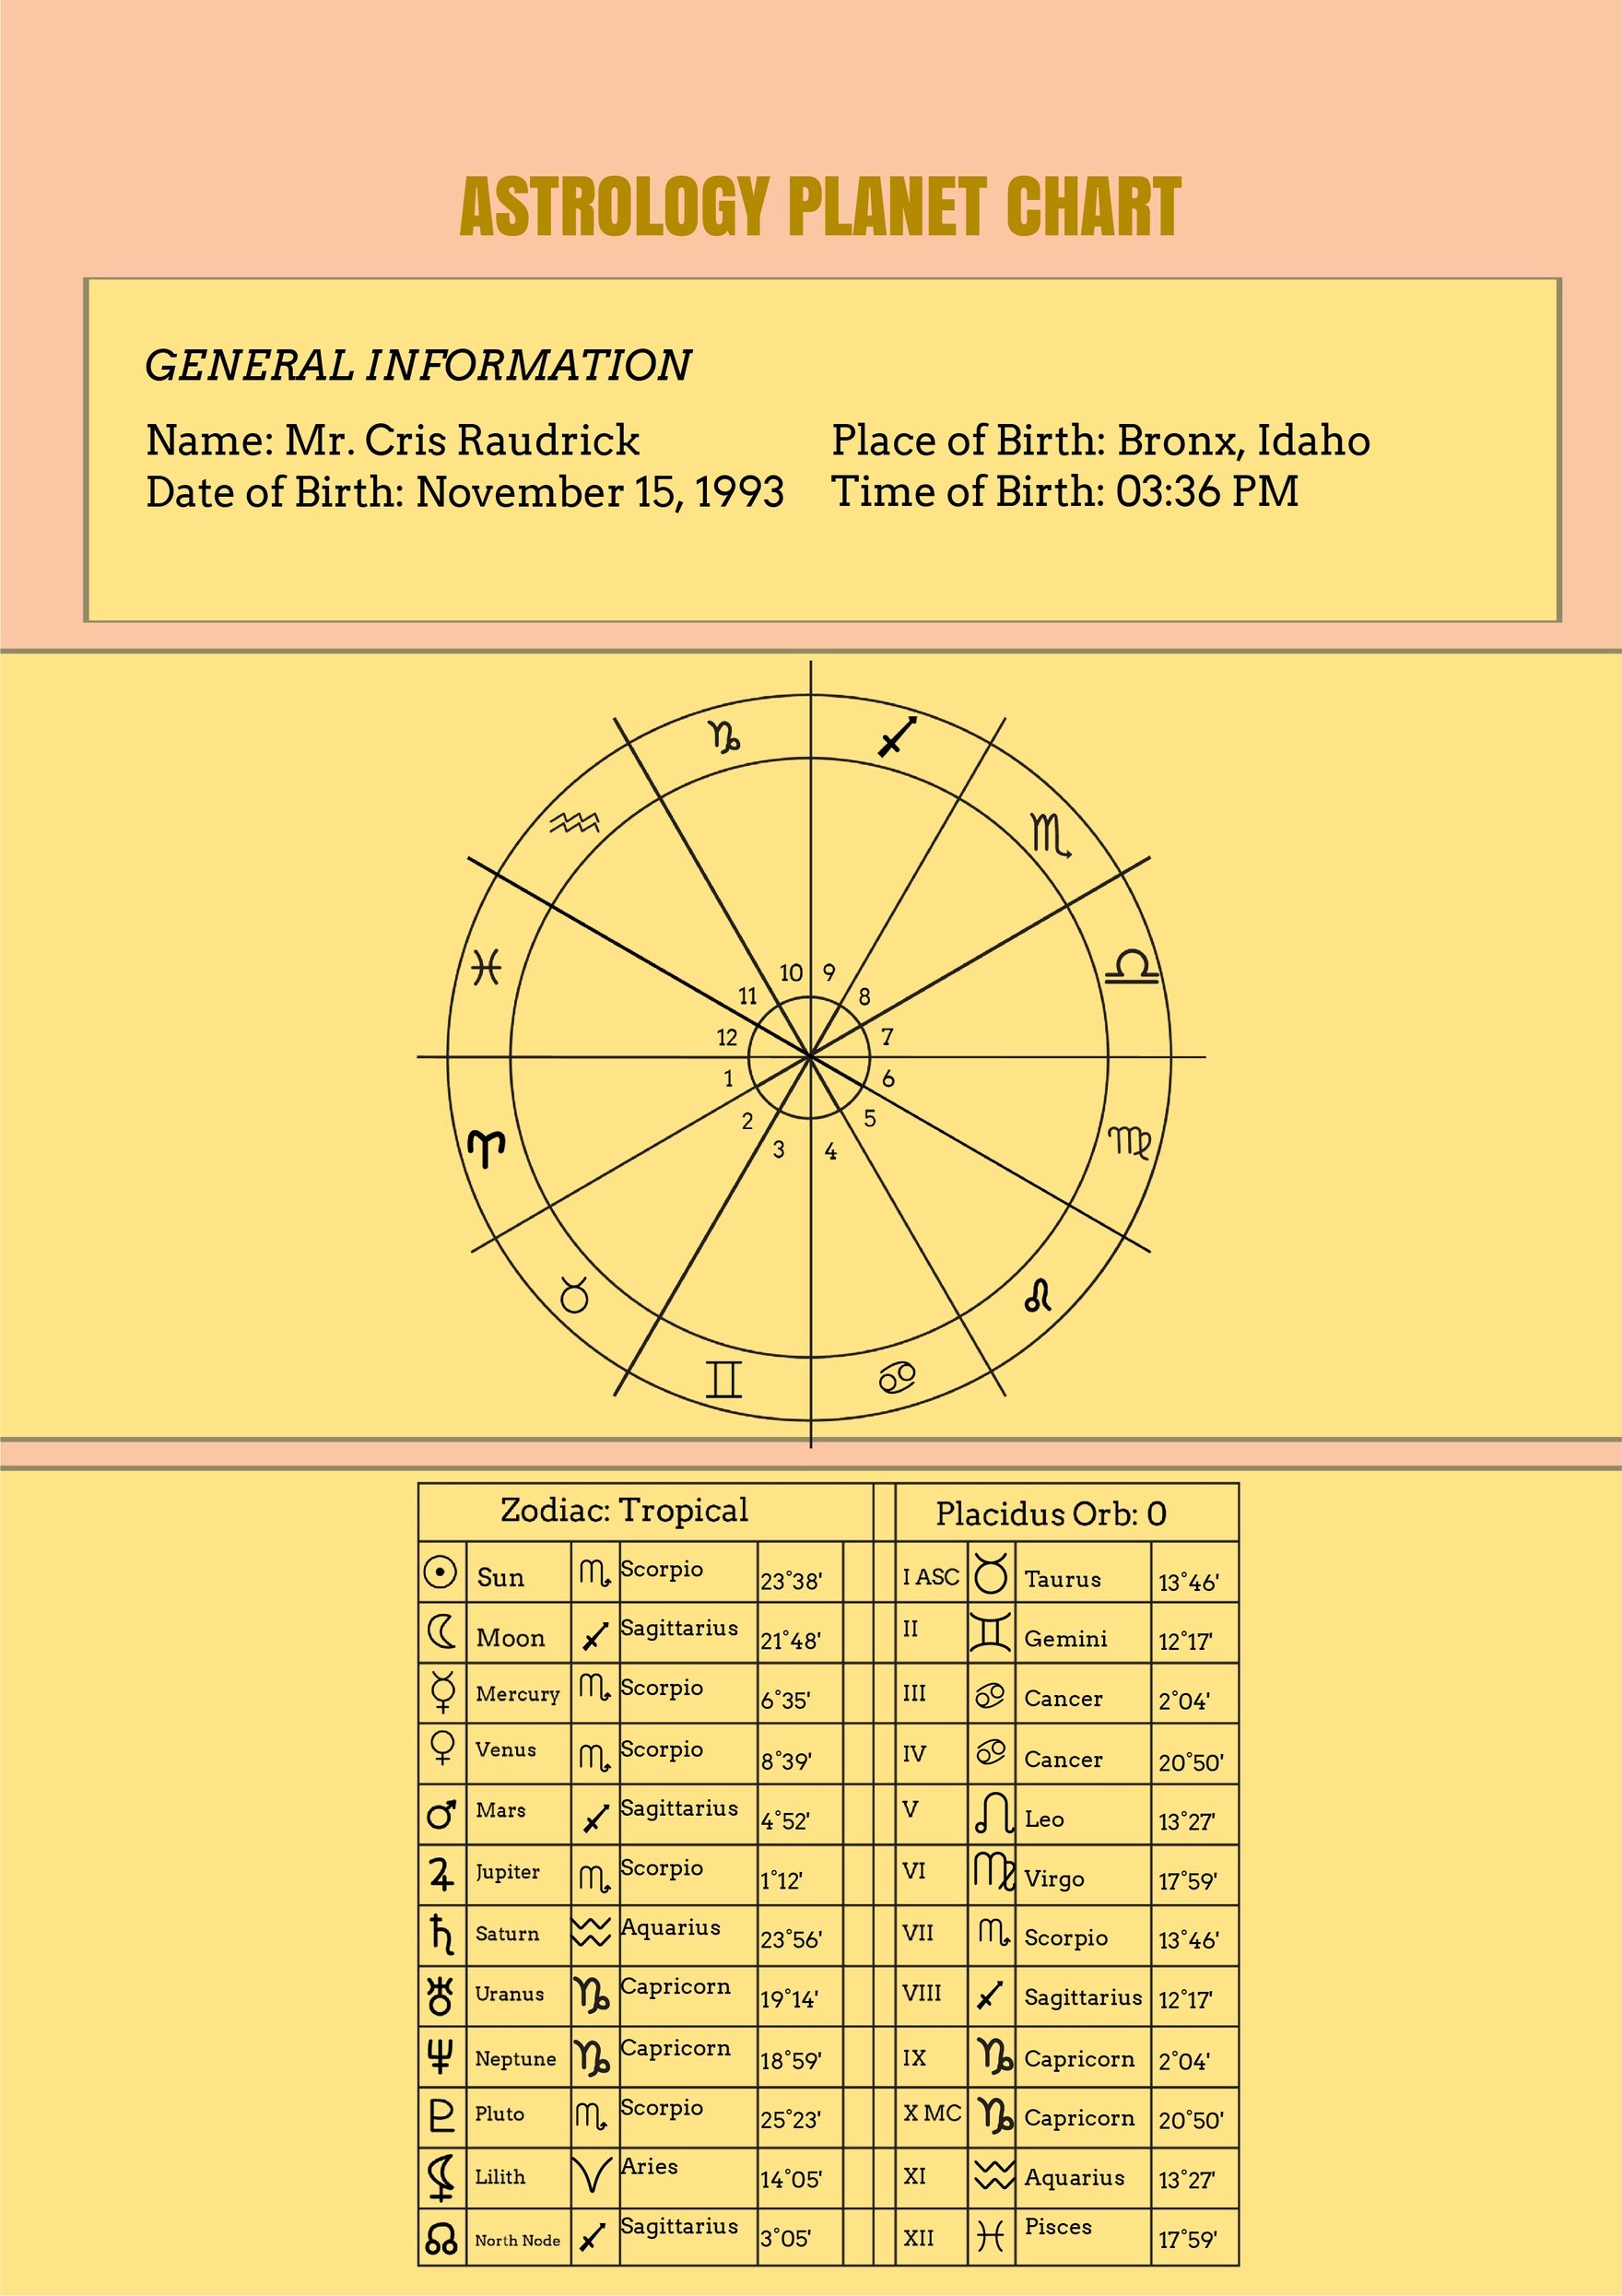 Free Astrology Planet Chart Template in PDF, Illustrator